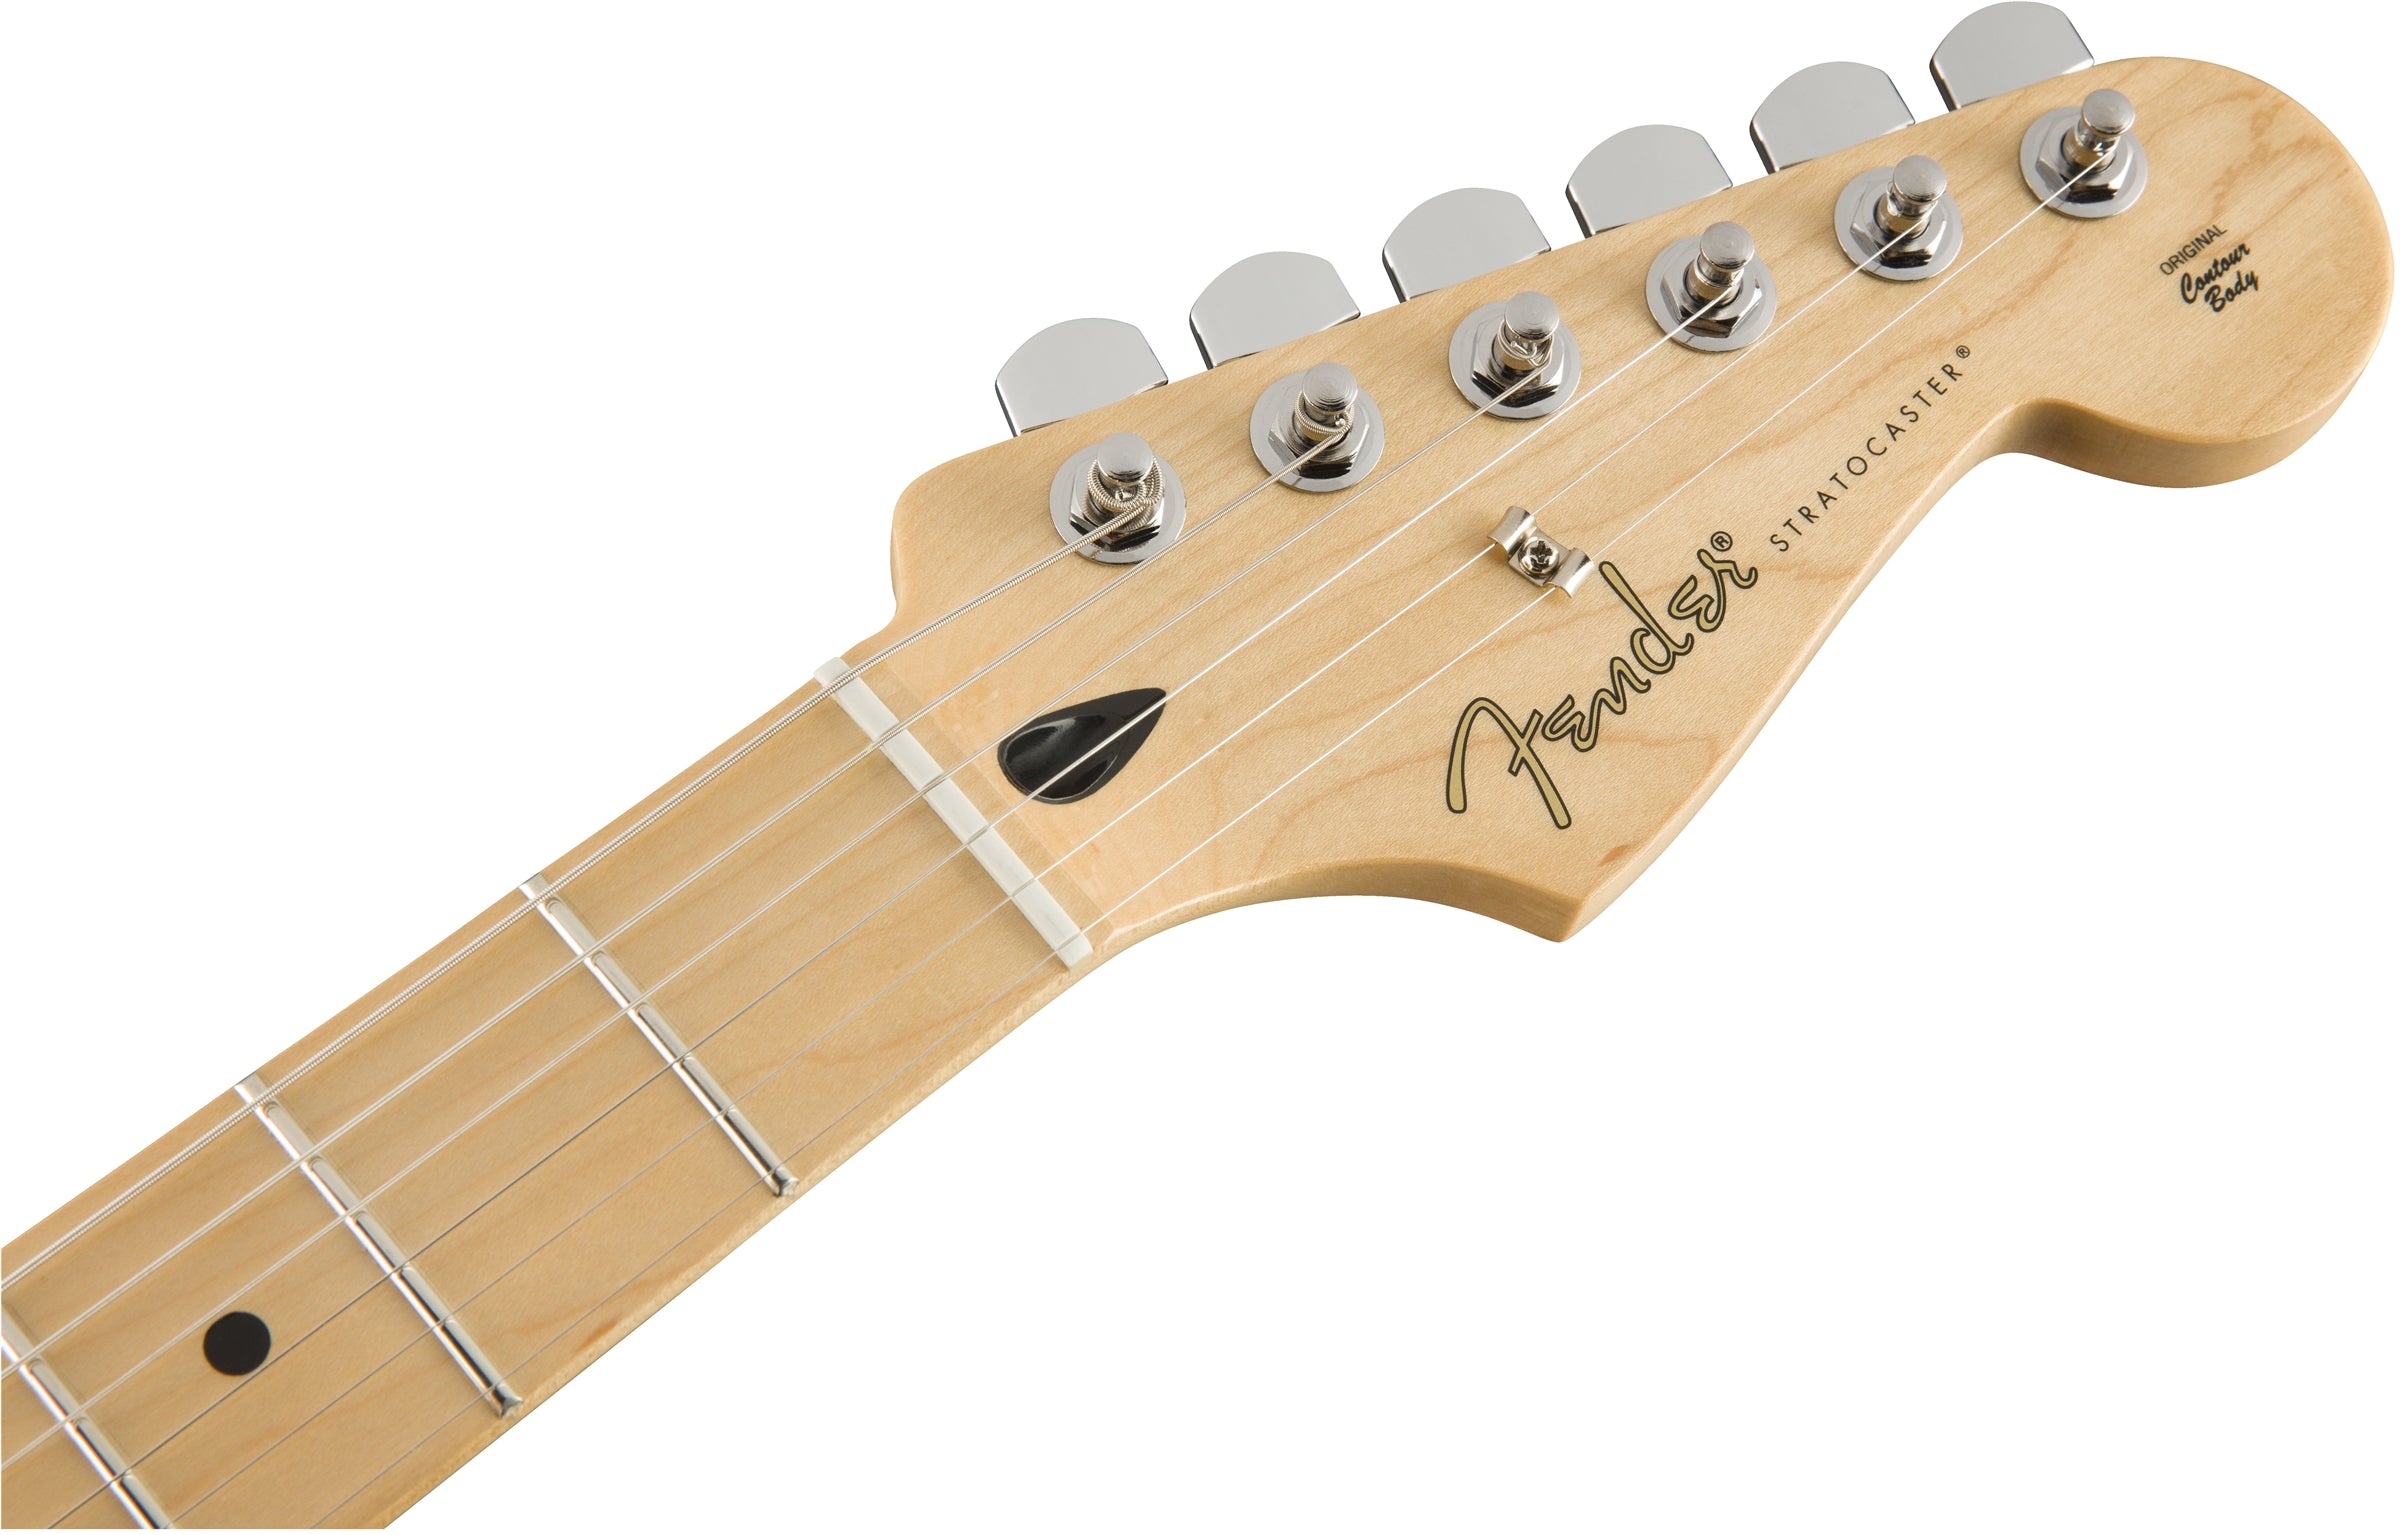 Fender Player Stratocaster® Plus Top, Maple Fingerboard, Aged Cherry Burst - Electric Guitar 電結他